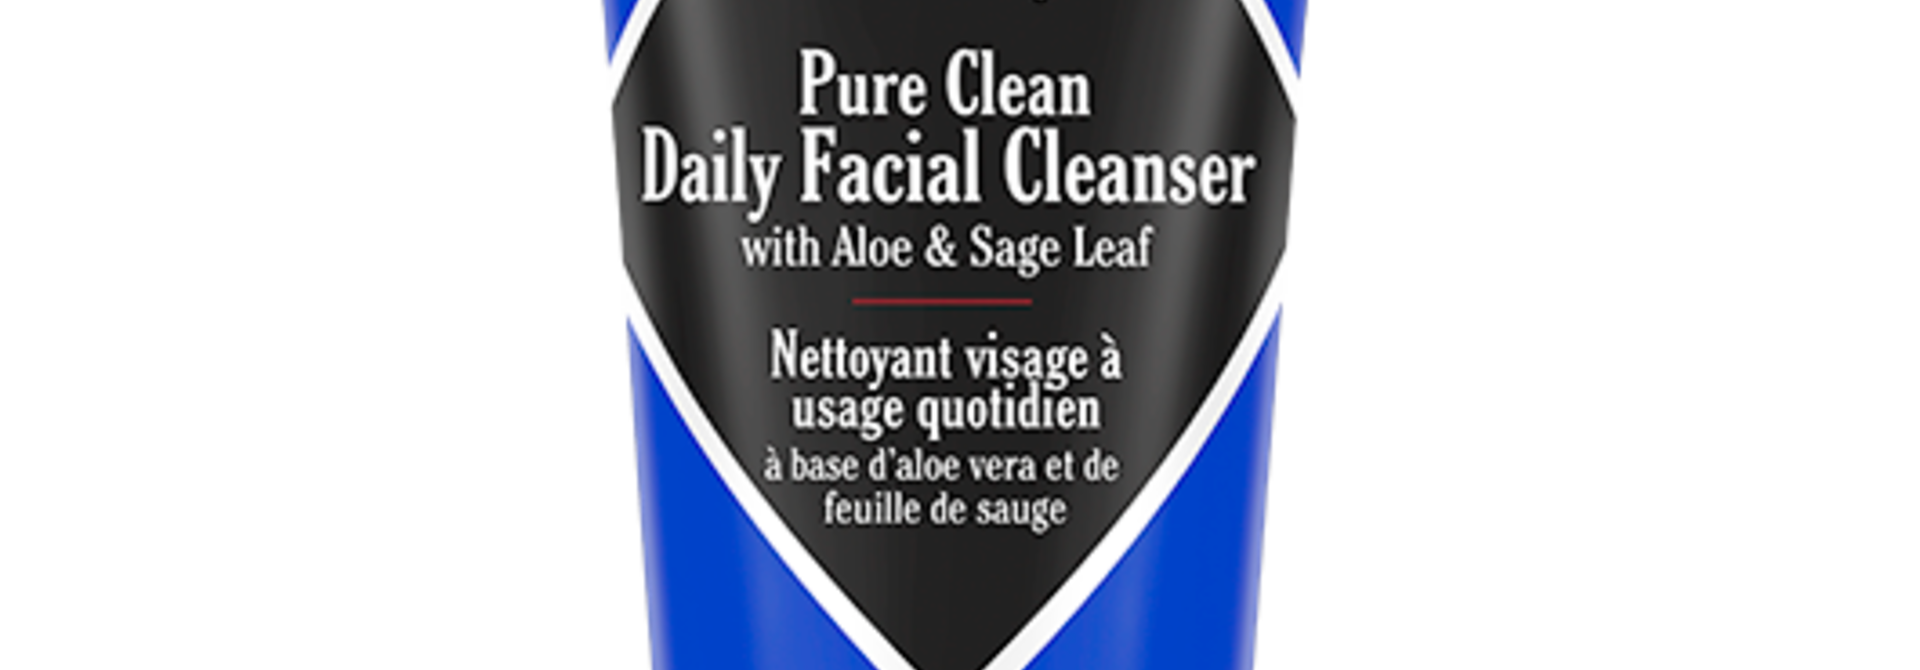 Pure Clean Daily Facial Cleanser | The Skincare Collection